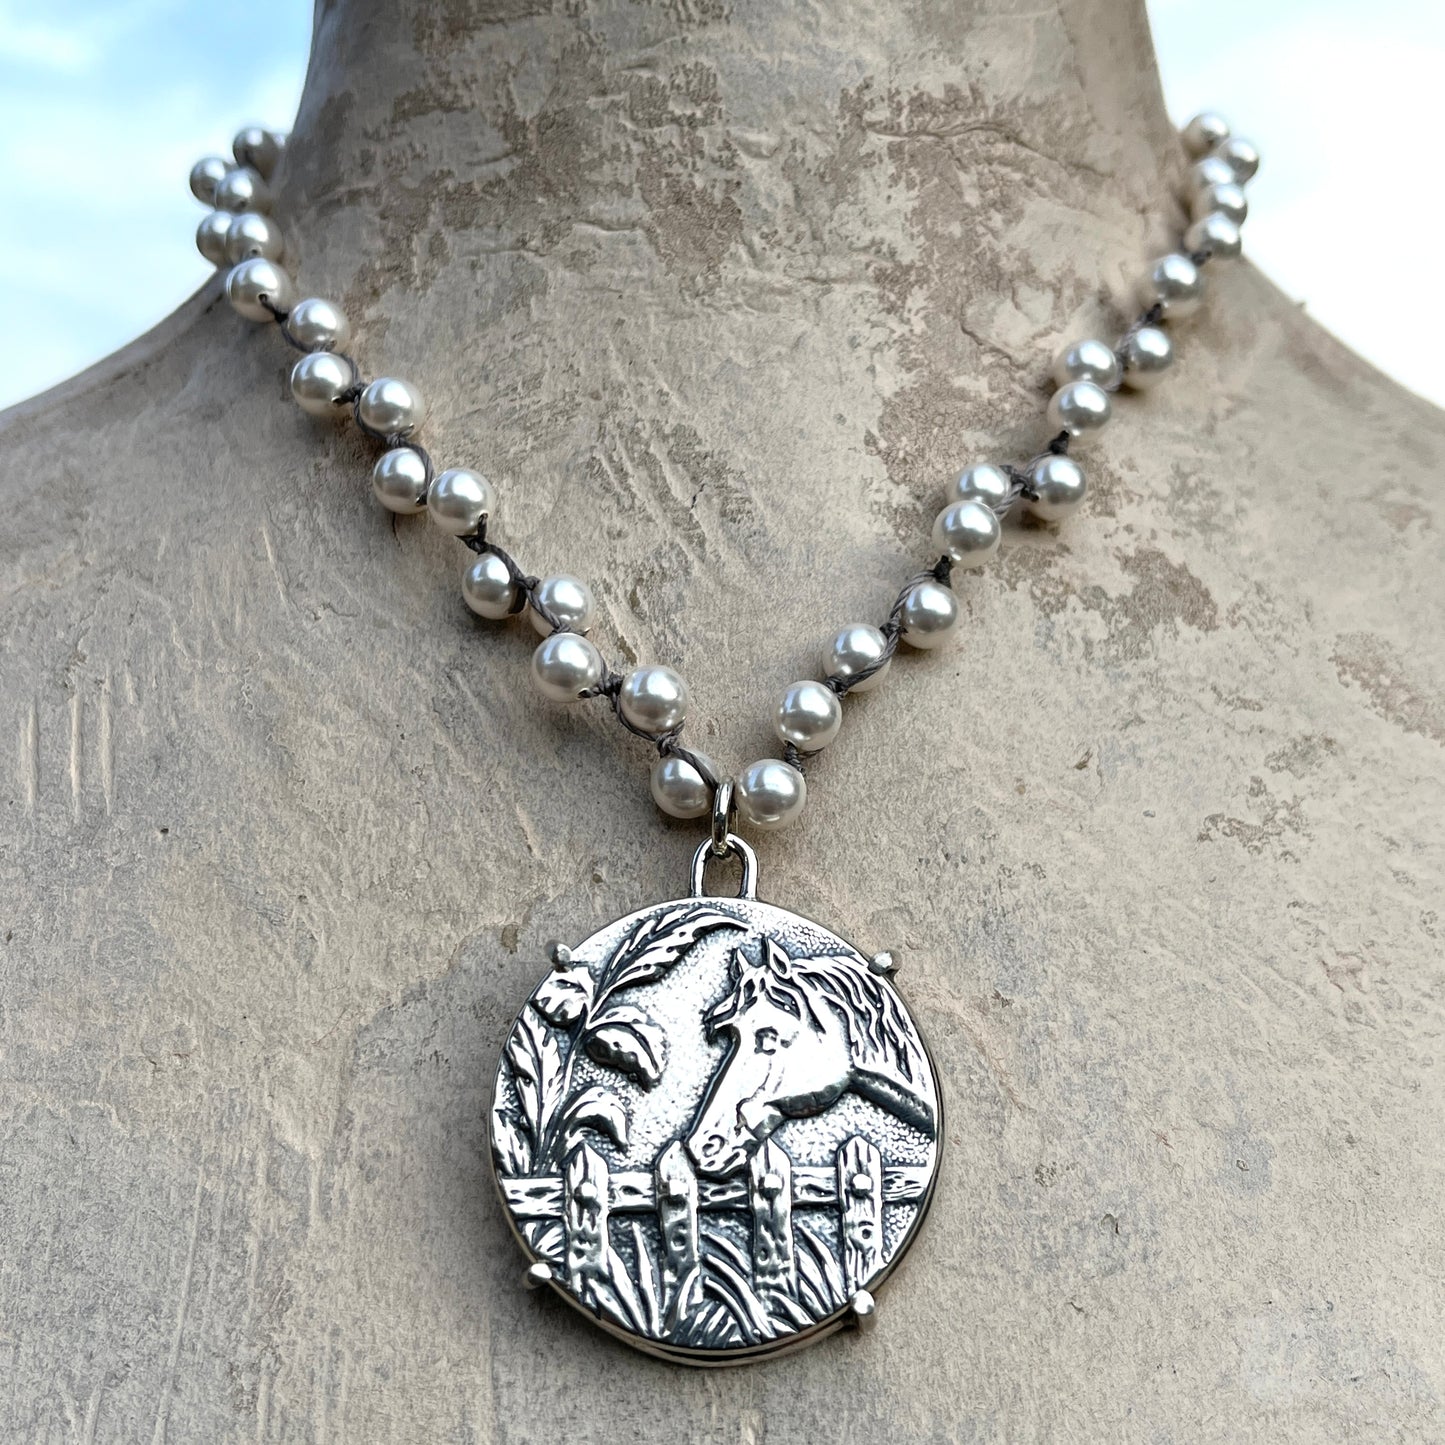 Best Friend Button on Pearl Horse Necklace